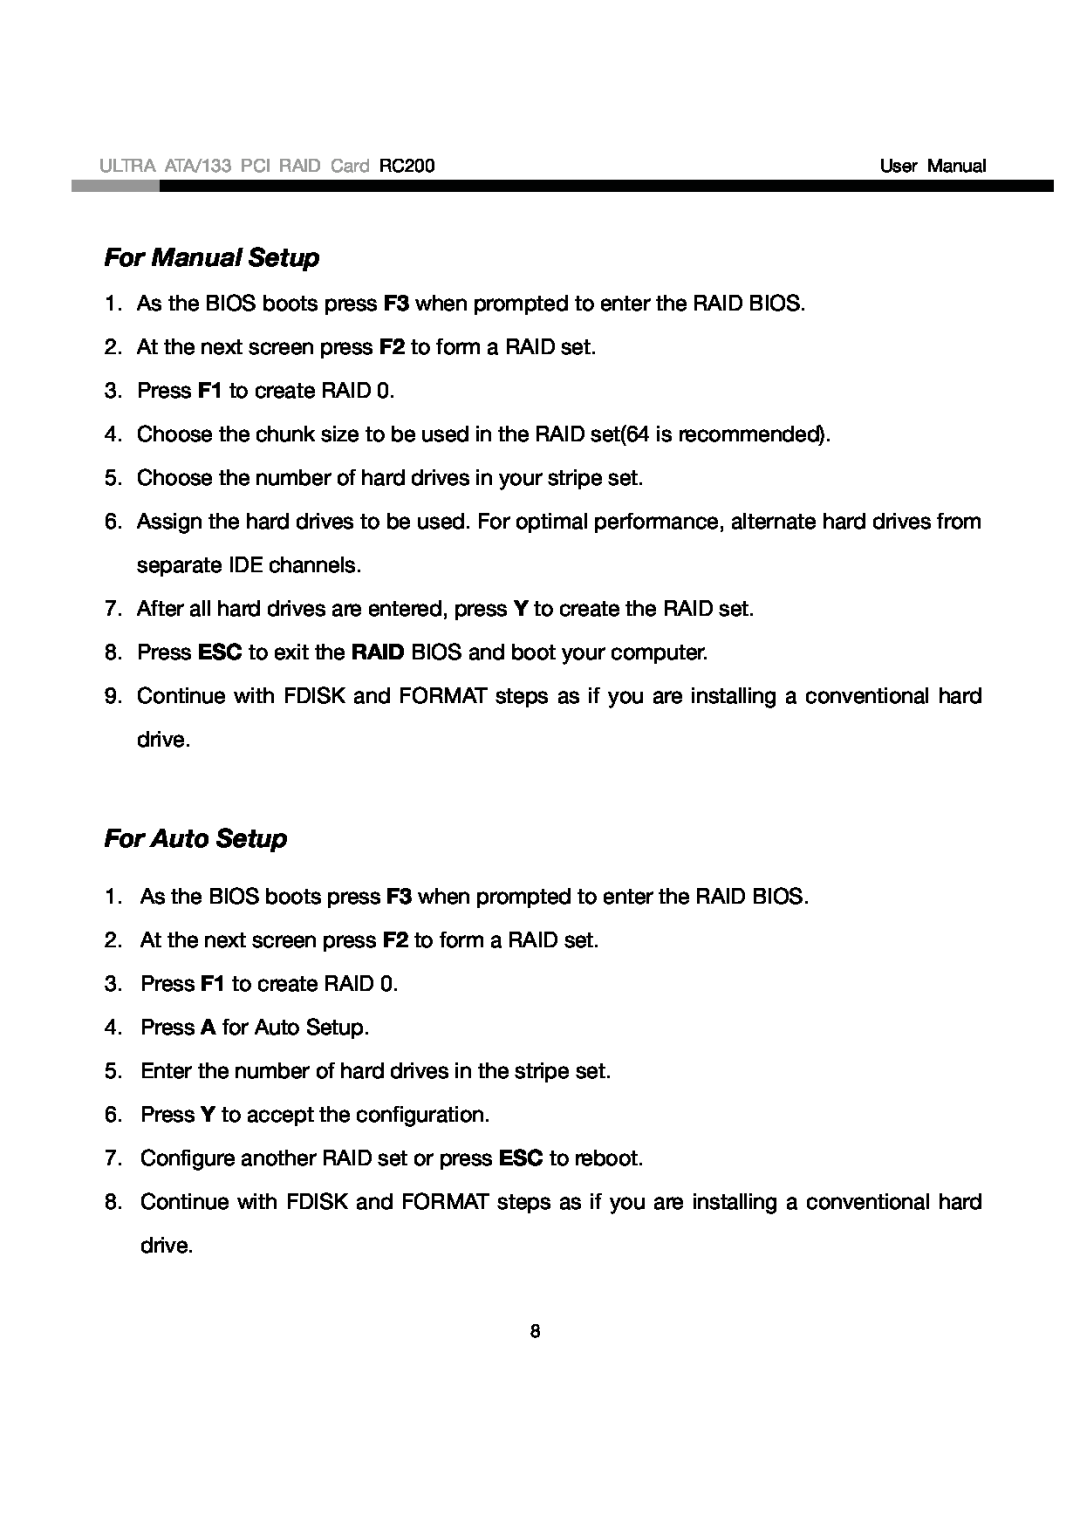 Rosewill RC200 user manual For Manual Setup, For Auto Setup 